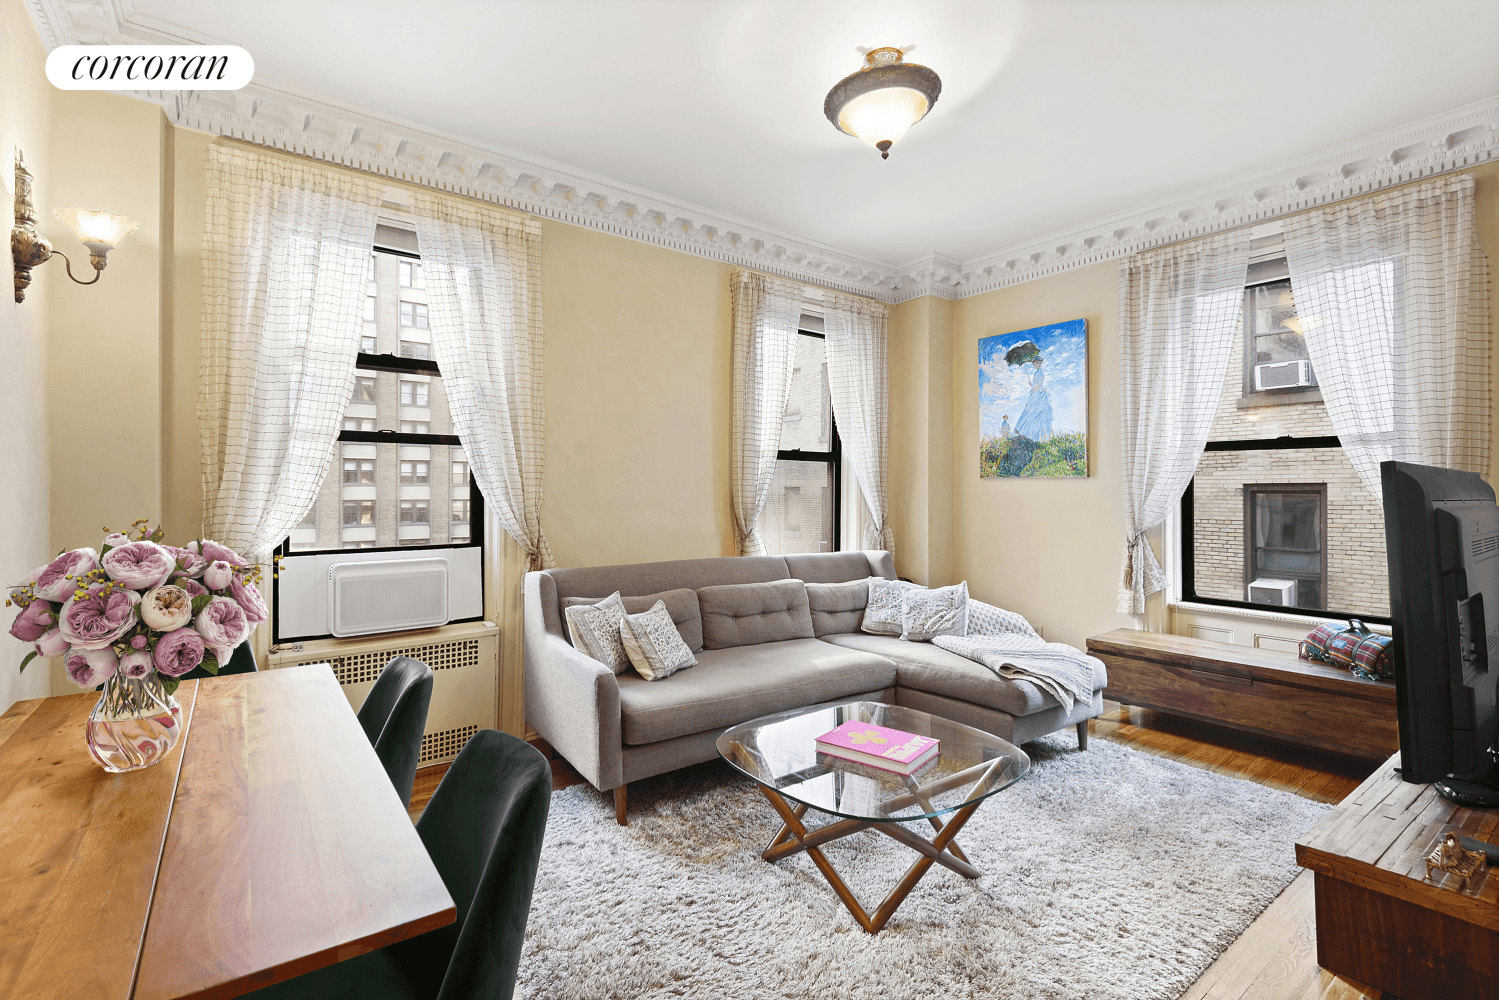 Step into sophisticated living with this stunning, quiet, 1 bedroom apartment nestled in the center of Manhattan.